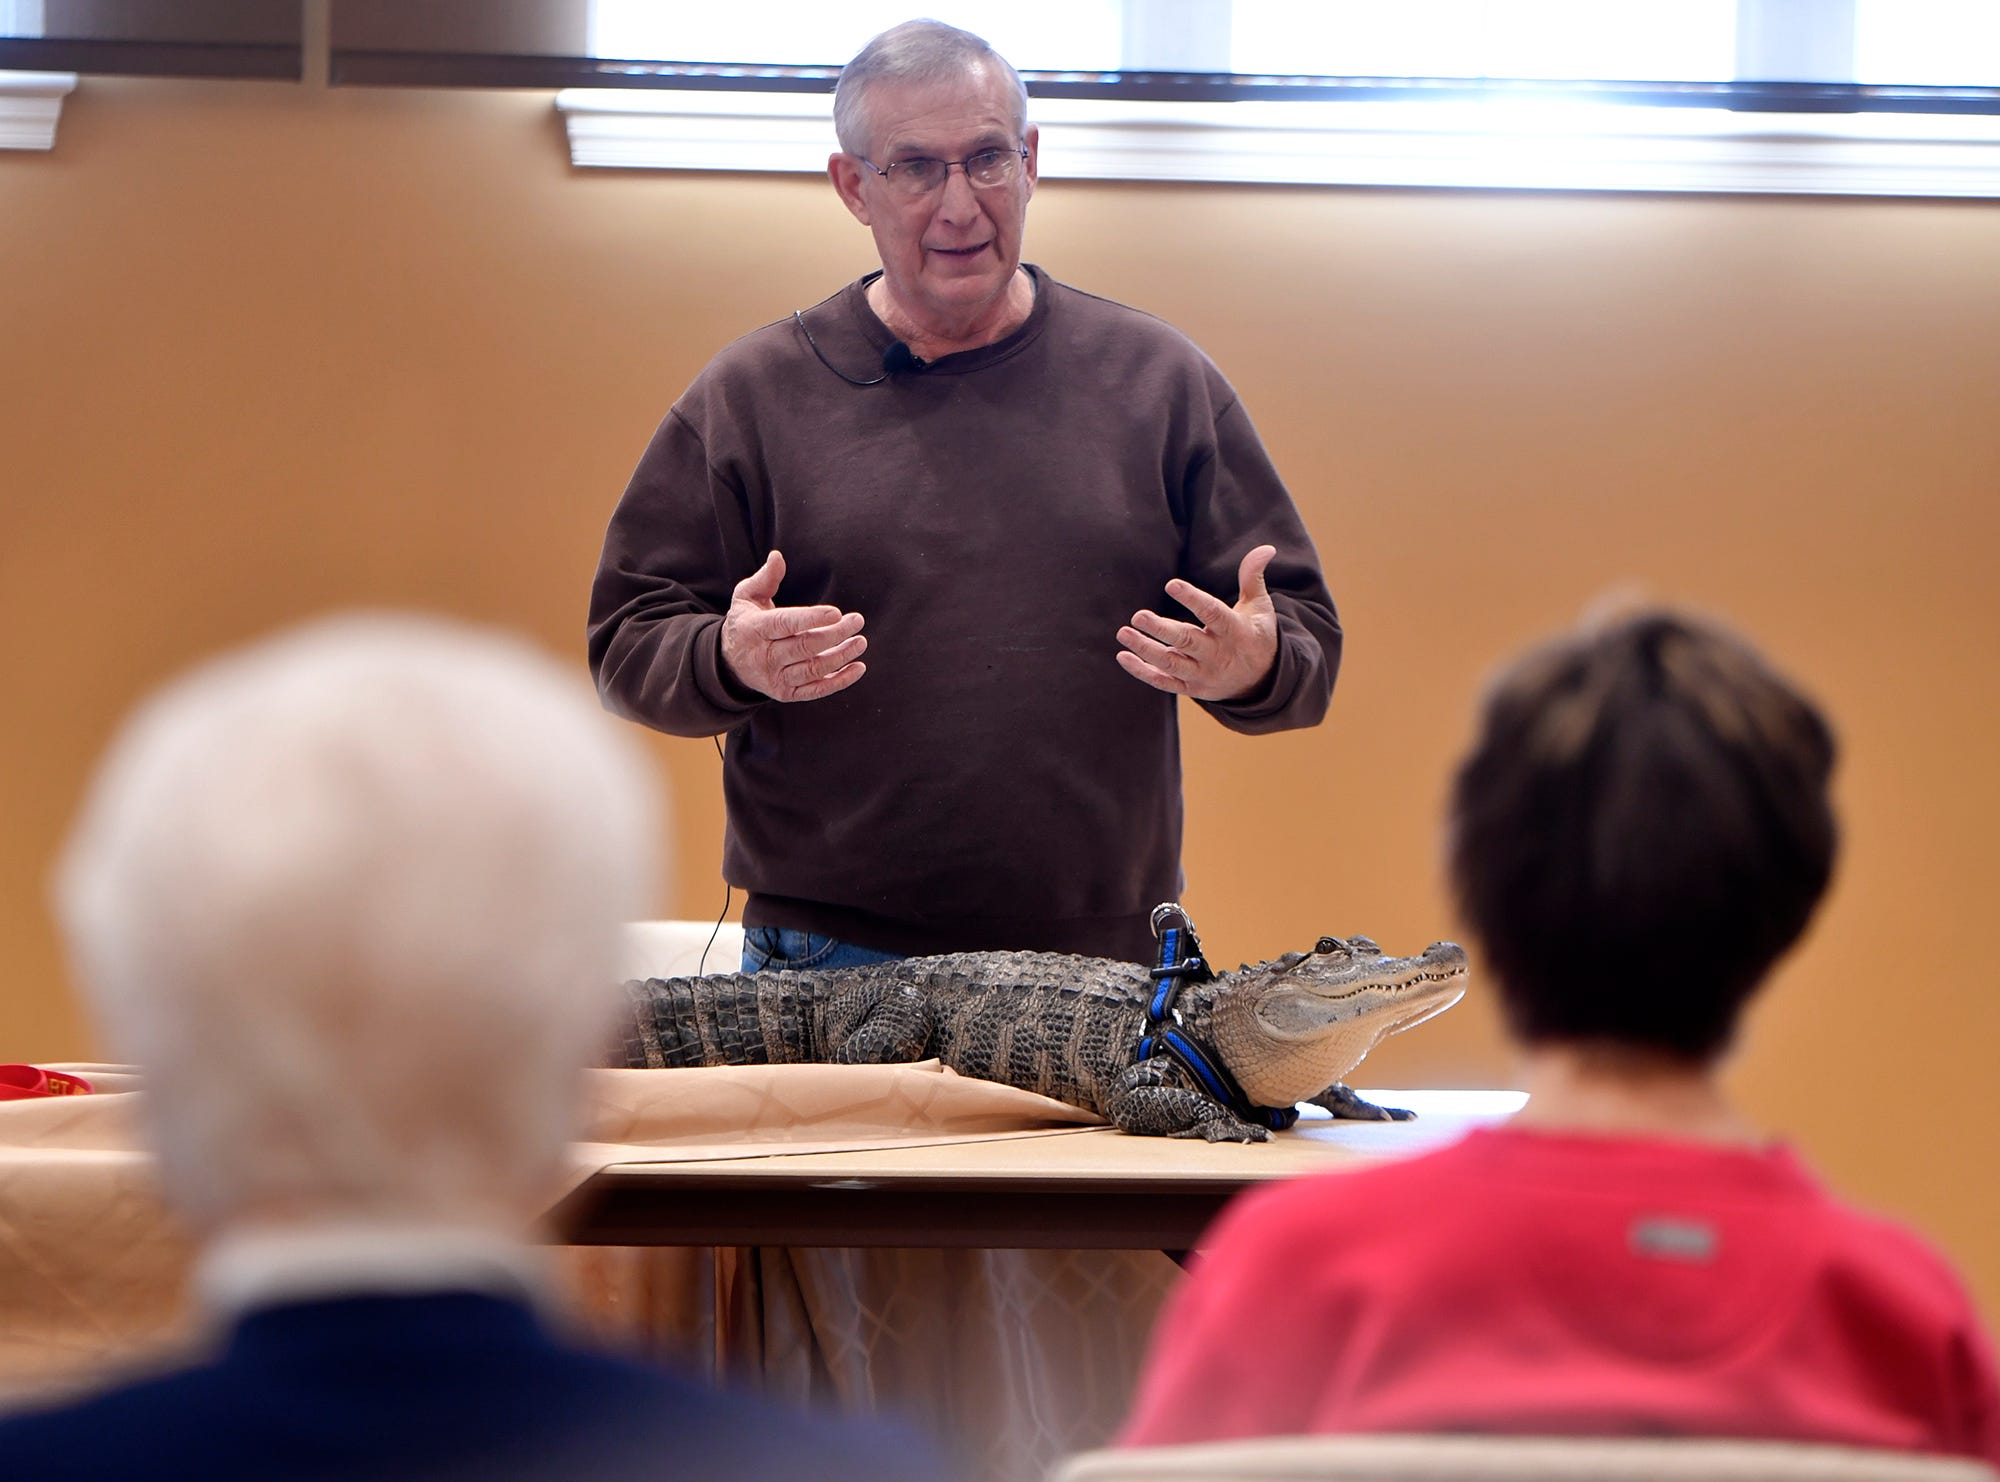 Joie Henney of Strinestown and his American alligator Wally visit seniors at the SpiriTrust Lutheran Village at Sprenkle Drive, Monday, January 14, 2019
John A. Pavoncello photo